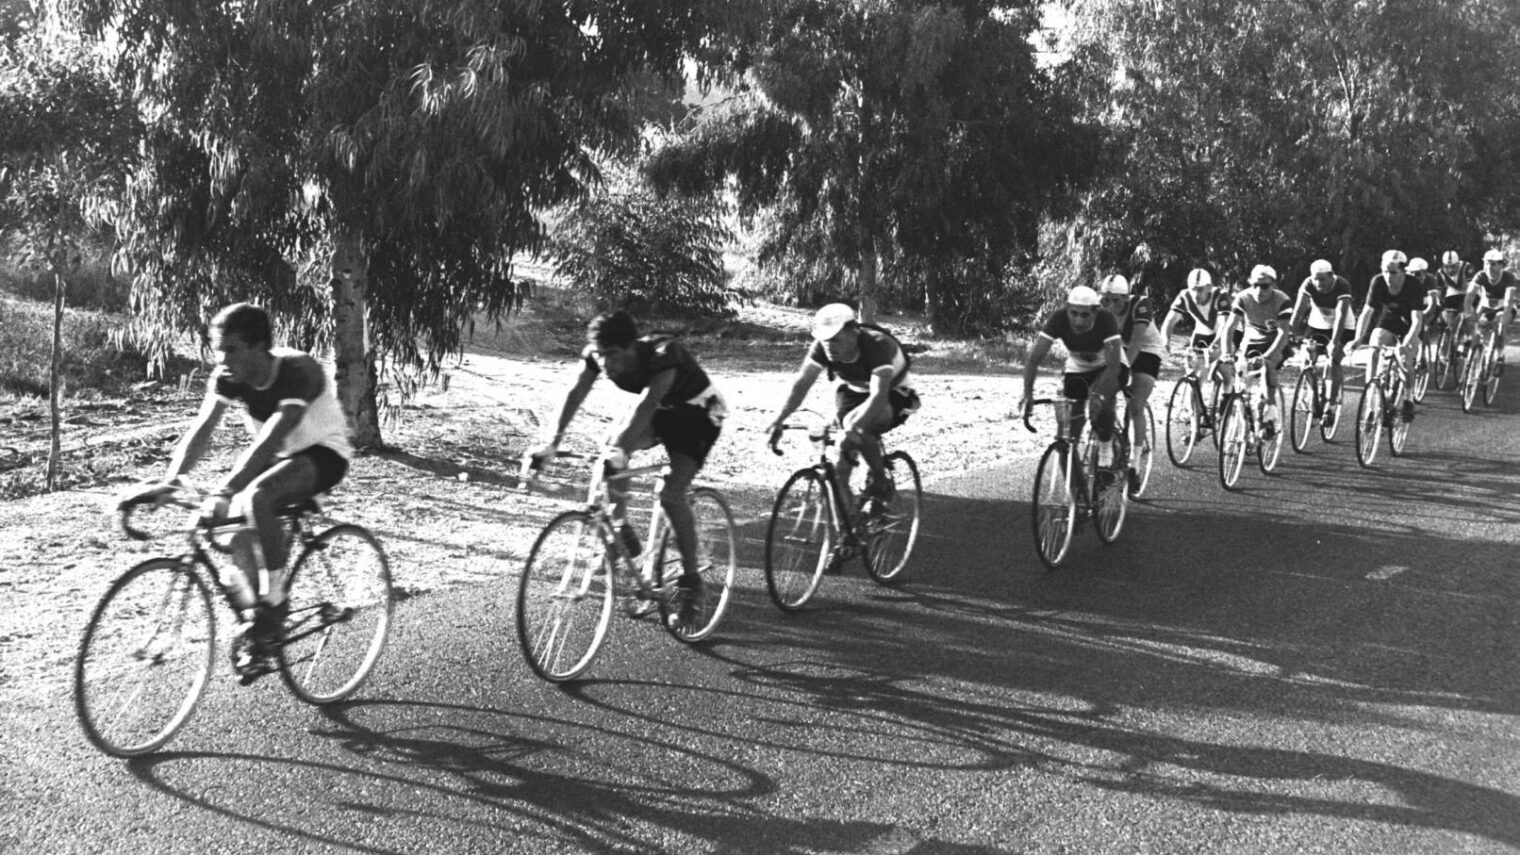 Biking competition during the fifth Maccabiah Games, 1957. Photo by Fritz Cohen/GPO